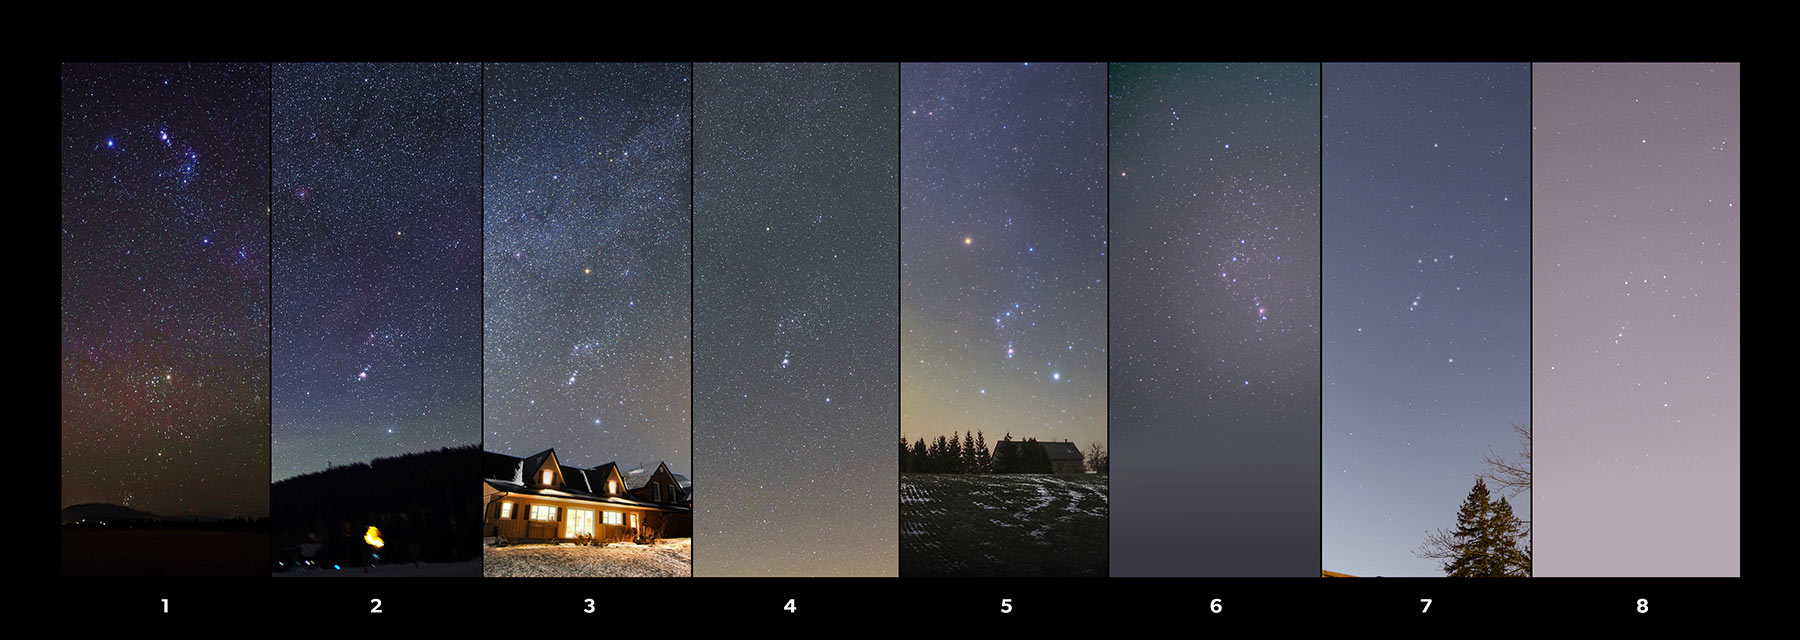 Light Pollution is Ruining our Night Sky